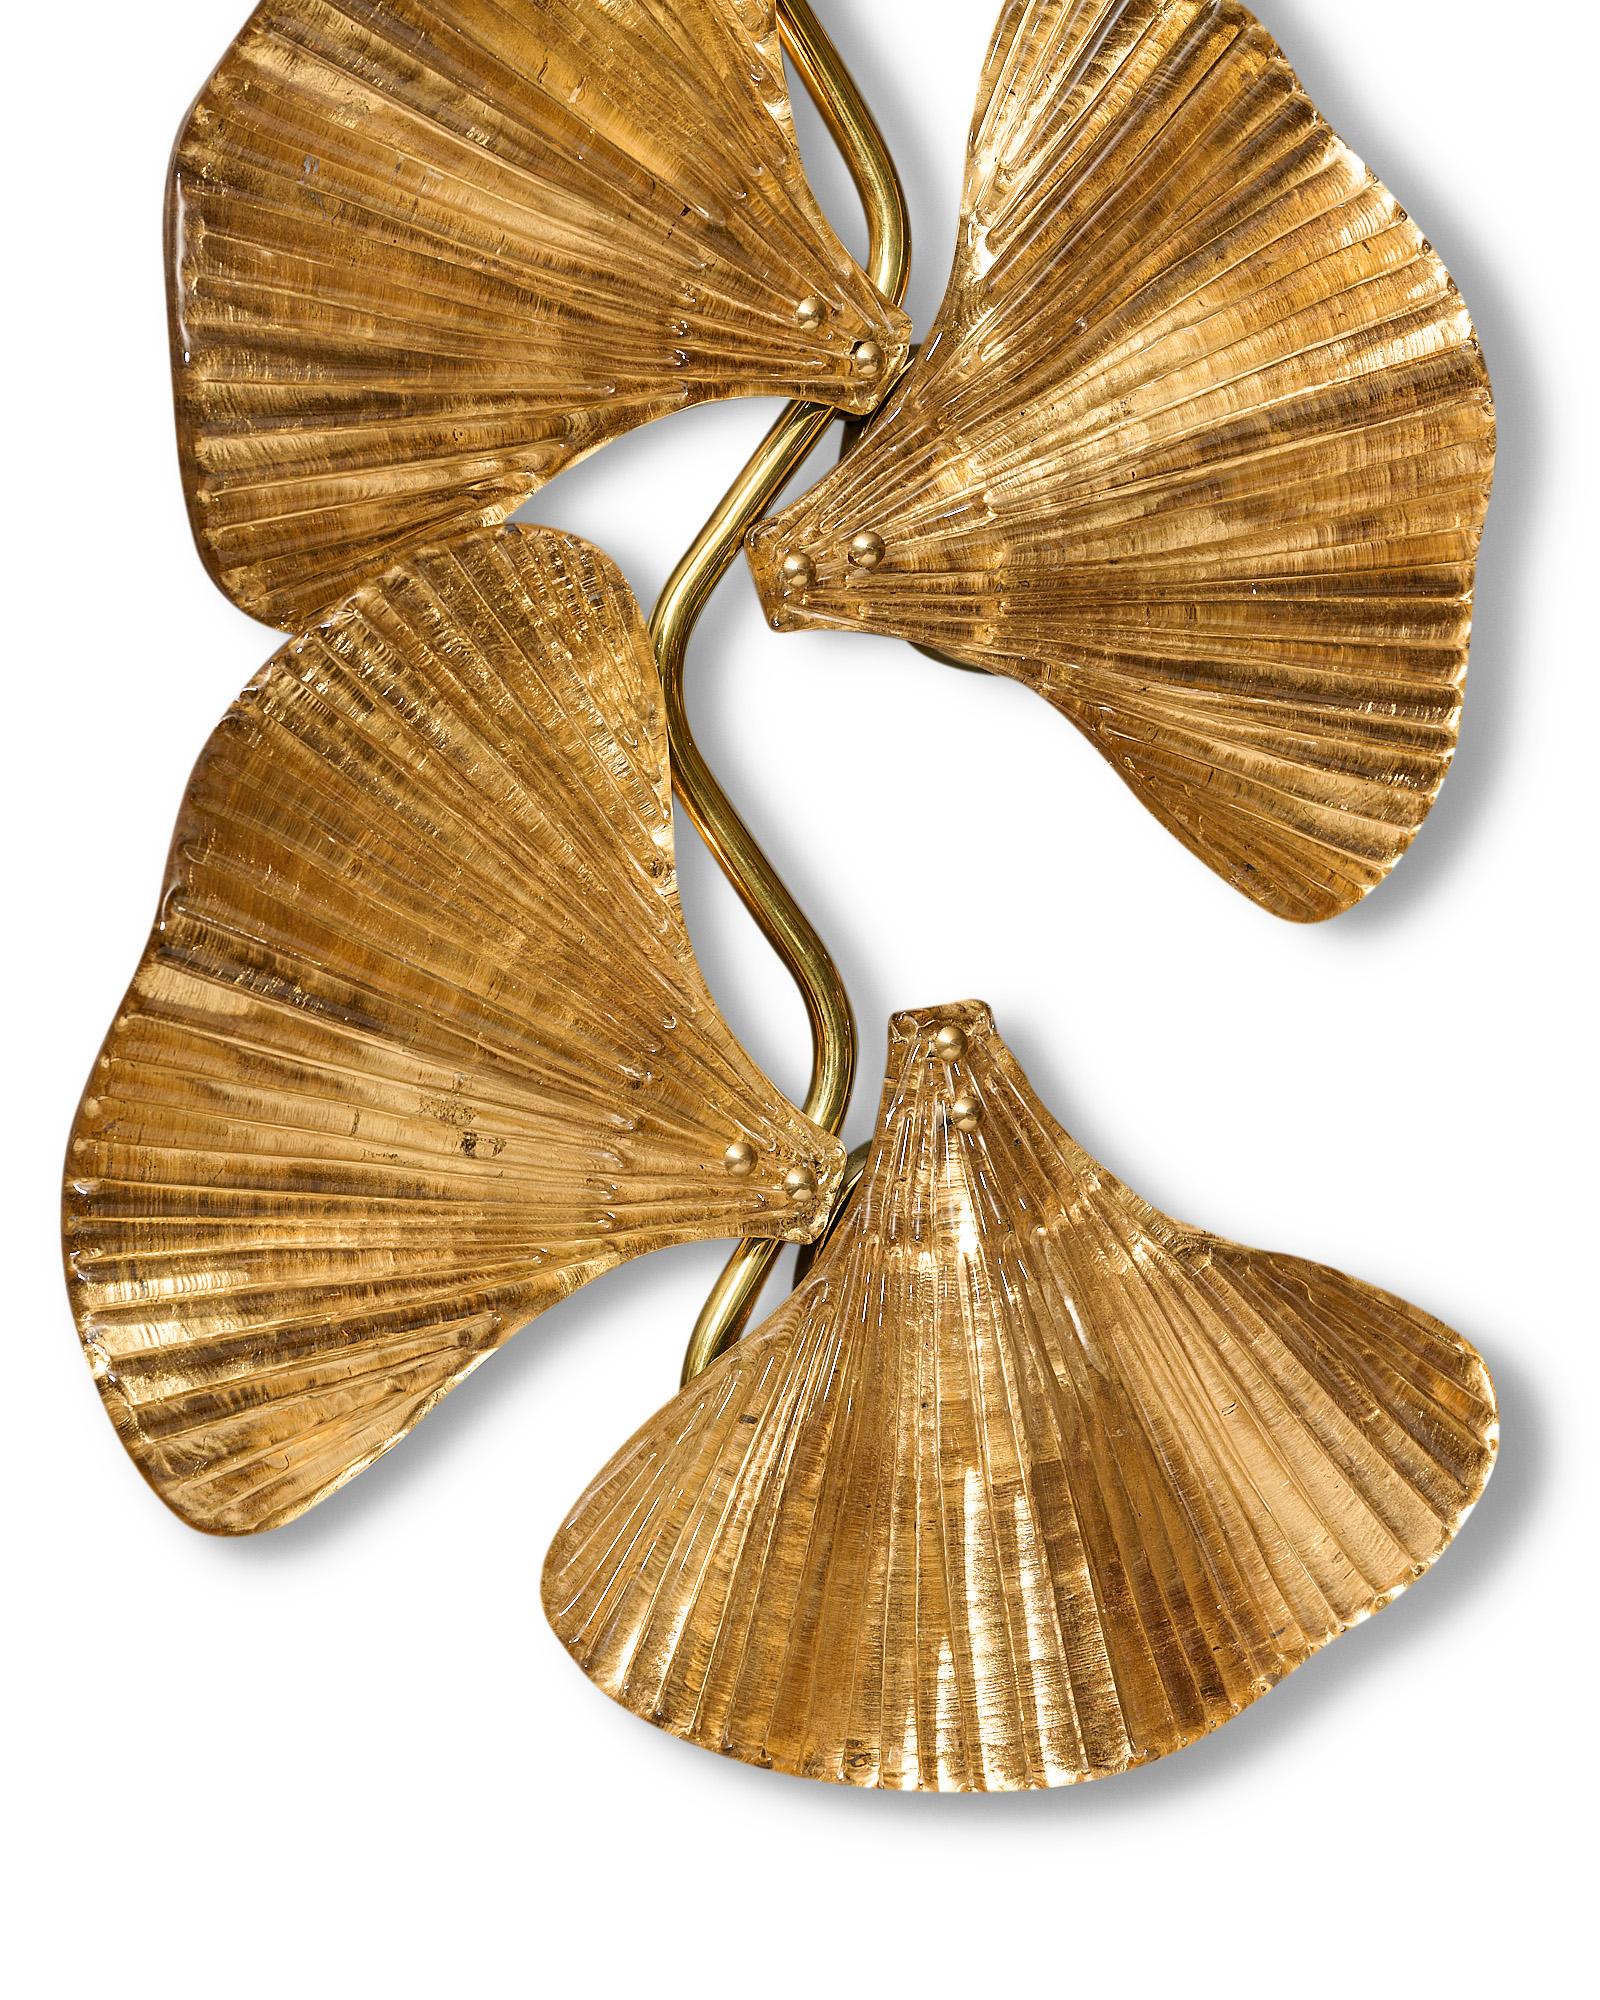 Pair of sconces, Italian, from the island of Murano. This pair is made of hand-blown glass with gold leaf in the delicate shape of gingko leaves. They are supported on a brass structure. Newly wired to US standards.